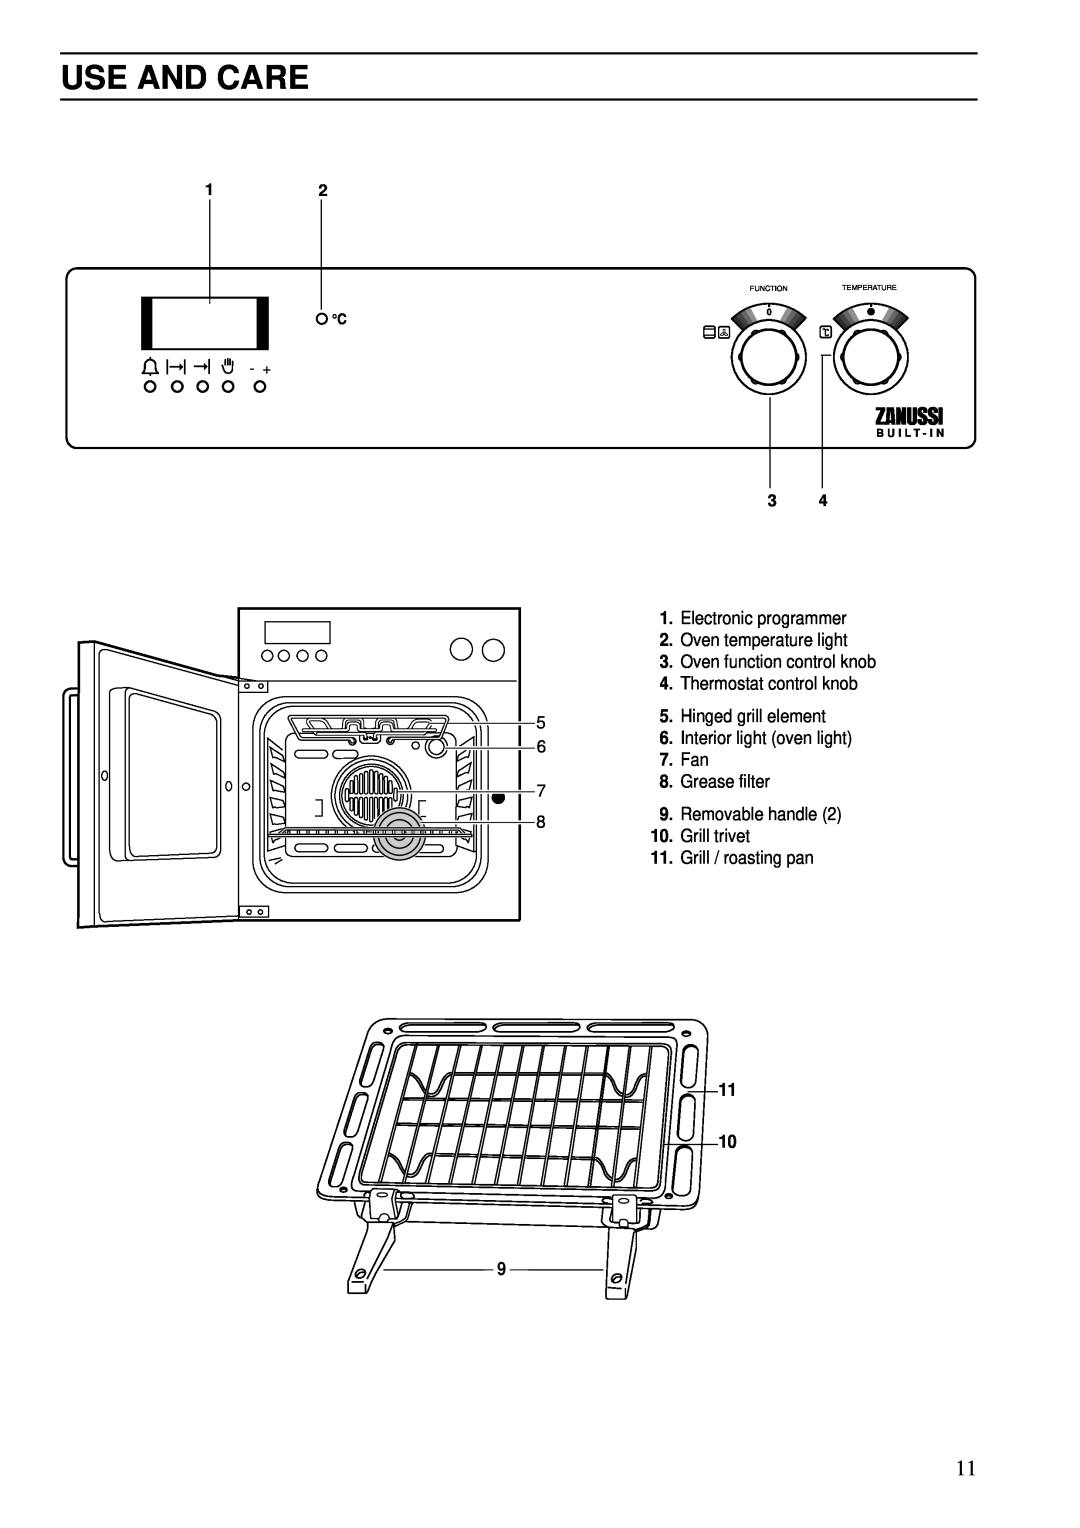 Zanussi ZBS 701 installation manual Use And Care, B U I L T - I N, Function, Temperature 